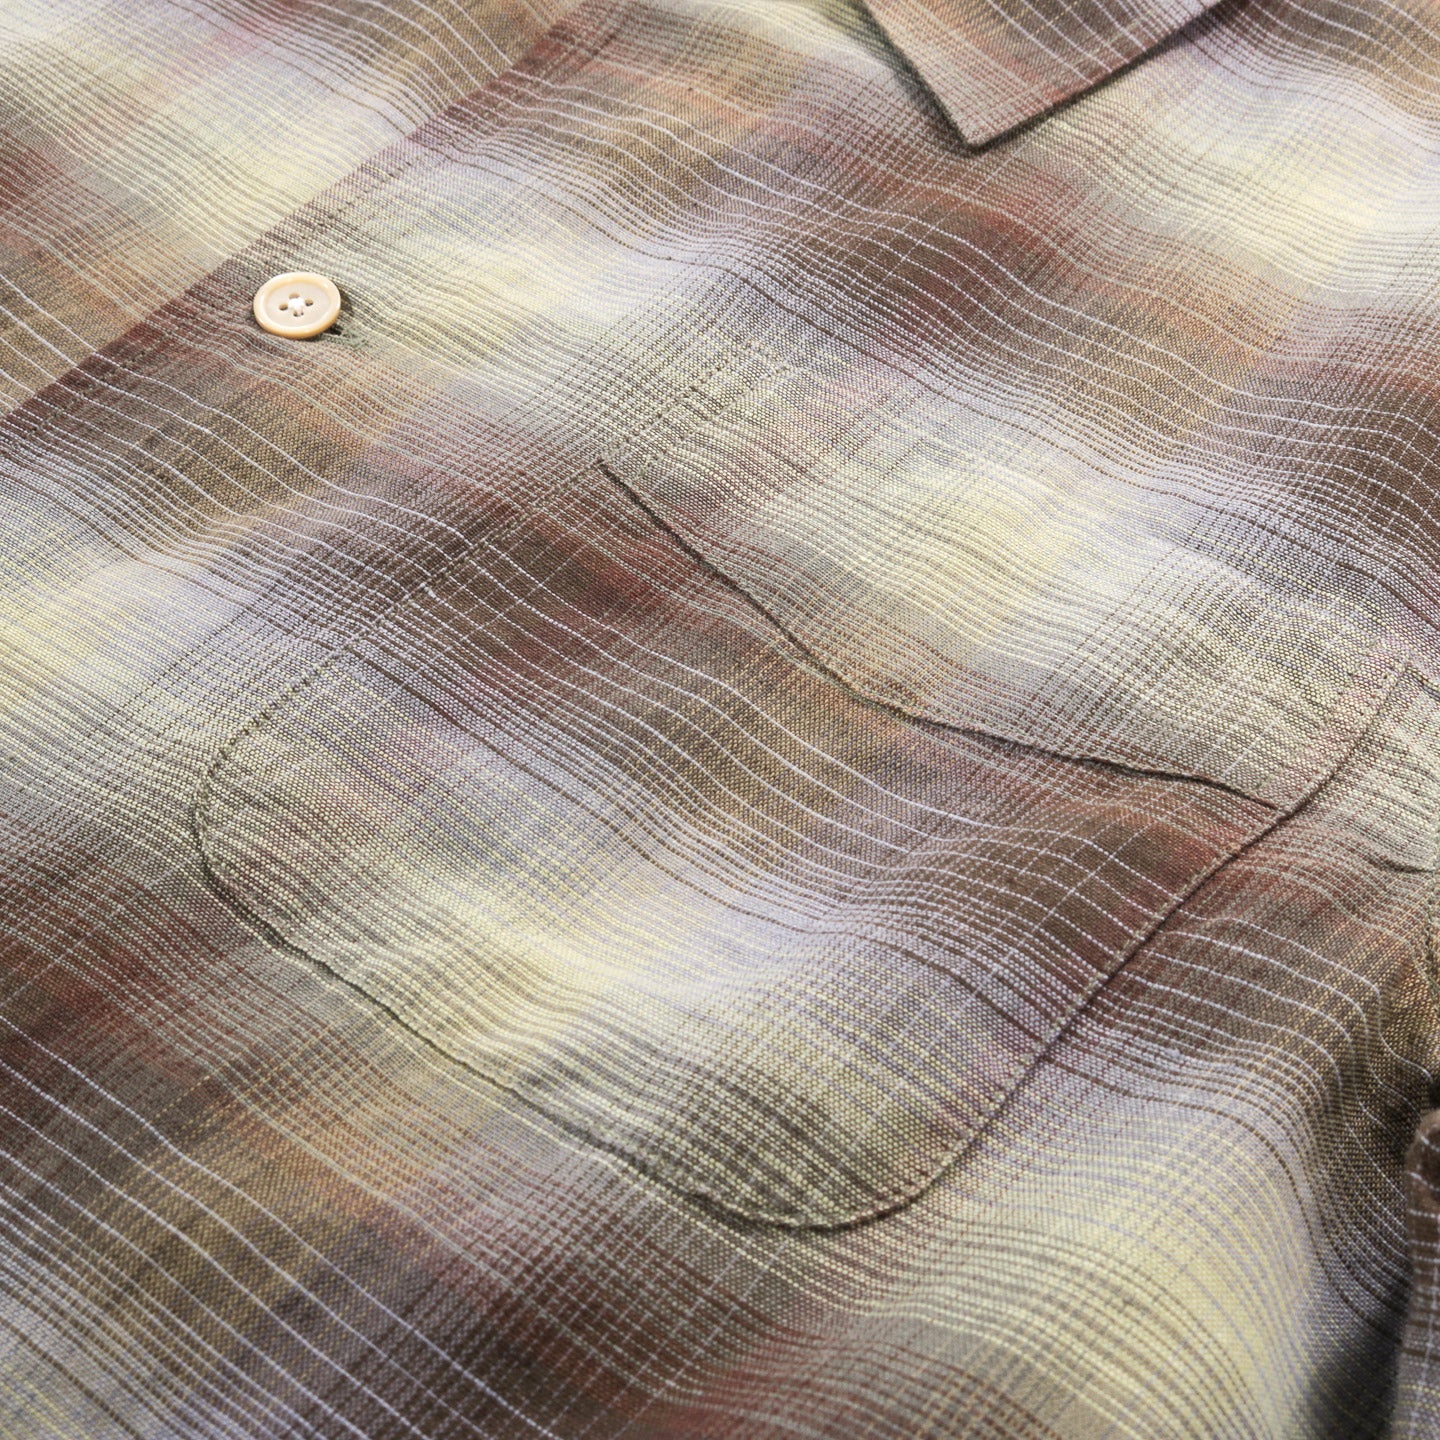 OUR LEGACY BOX SHIRT MURKY STATIC SUMMER WEAVE